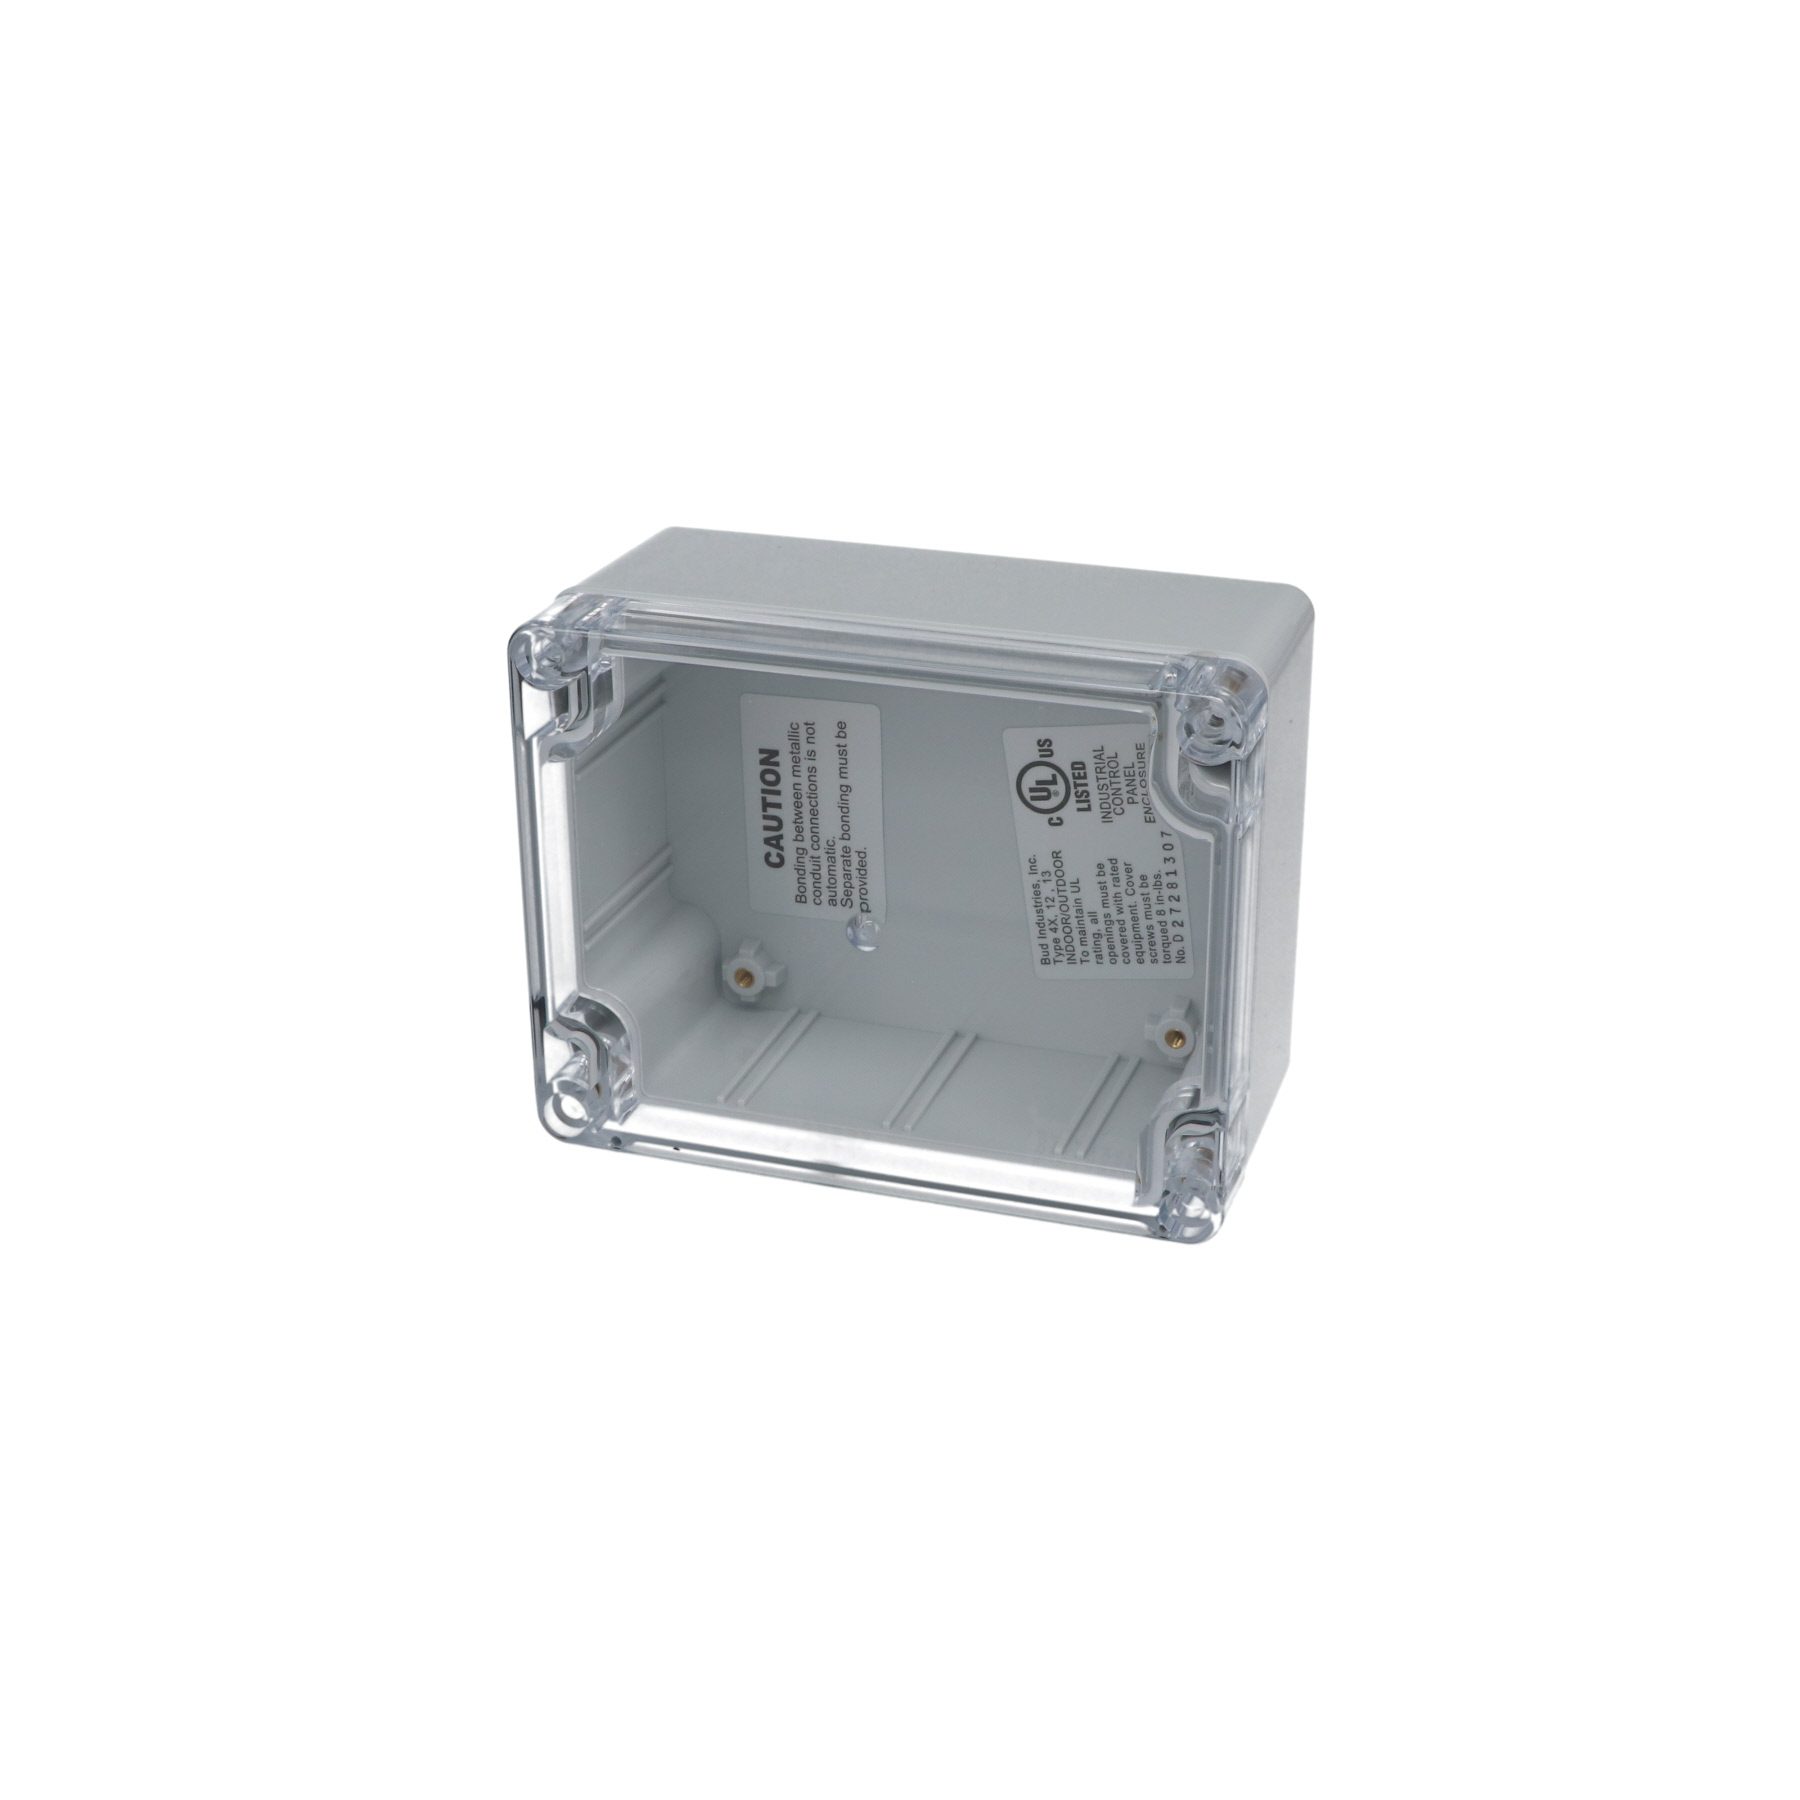 IP65 NEMA 4X Box with Clear Cover PN-1323-C